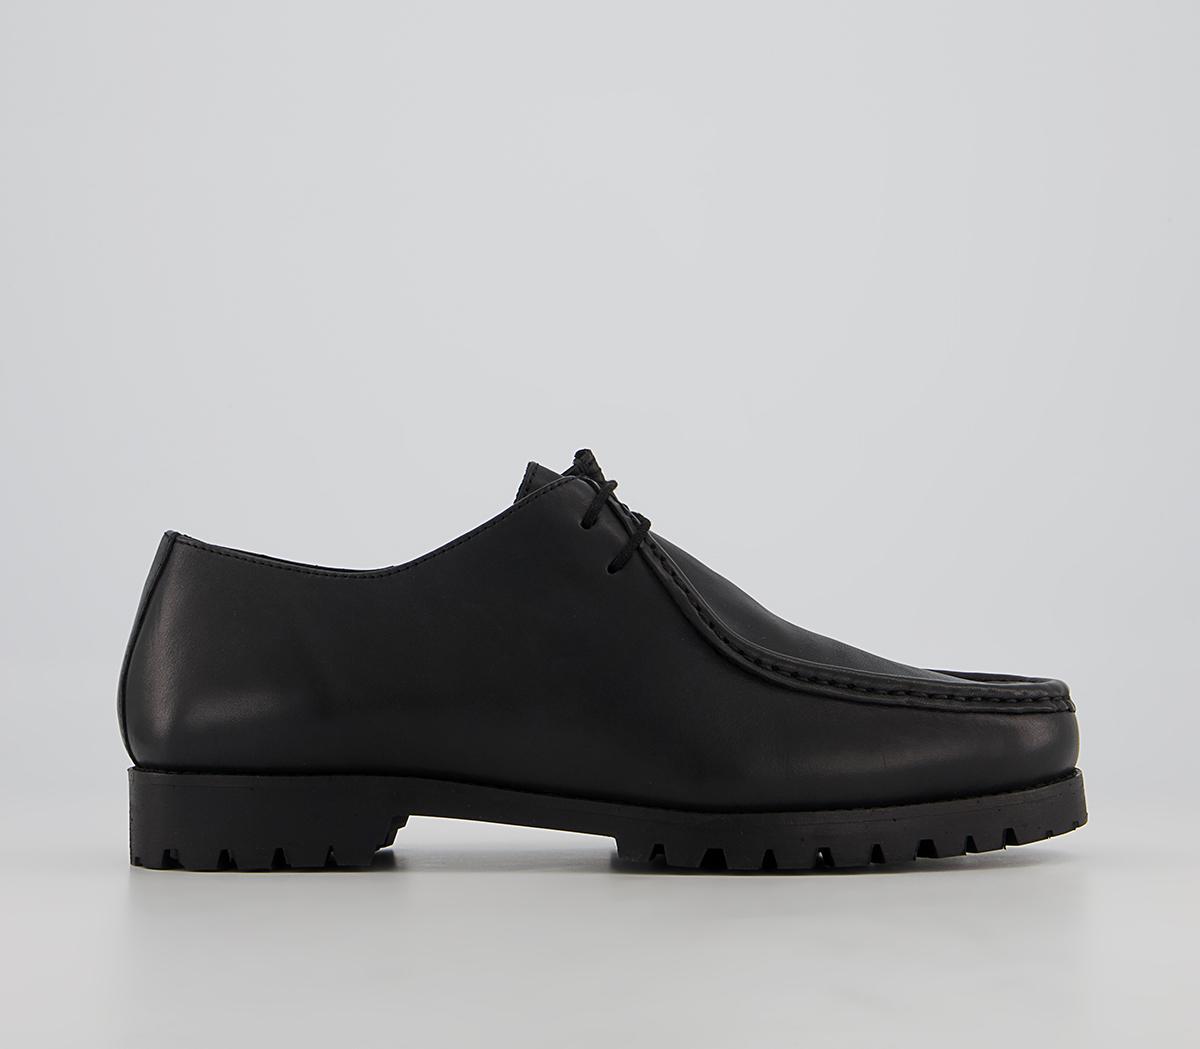 OfficeMatlock Moccasin Toe Derby ShoesBlack Leather